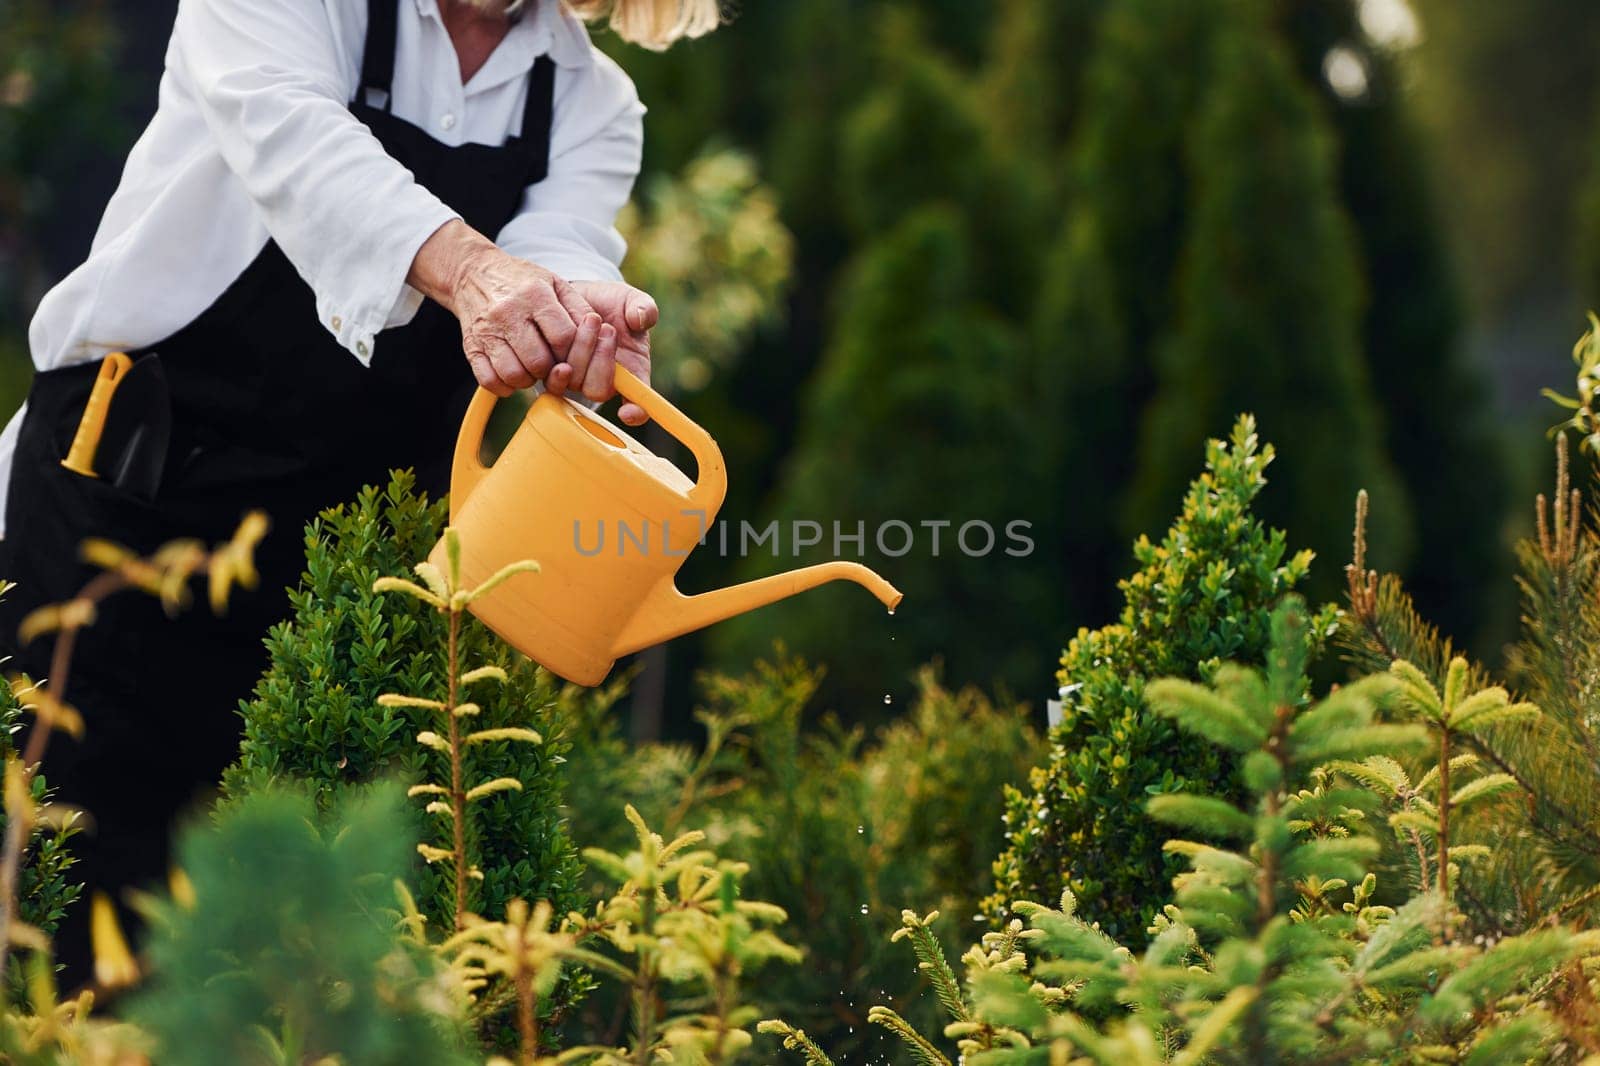 Using yellow colored watering can. Senior woman is in the garden at daytime. Conception of plants and seasons.